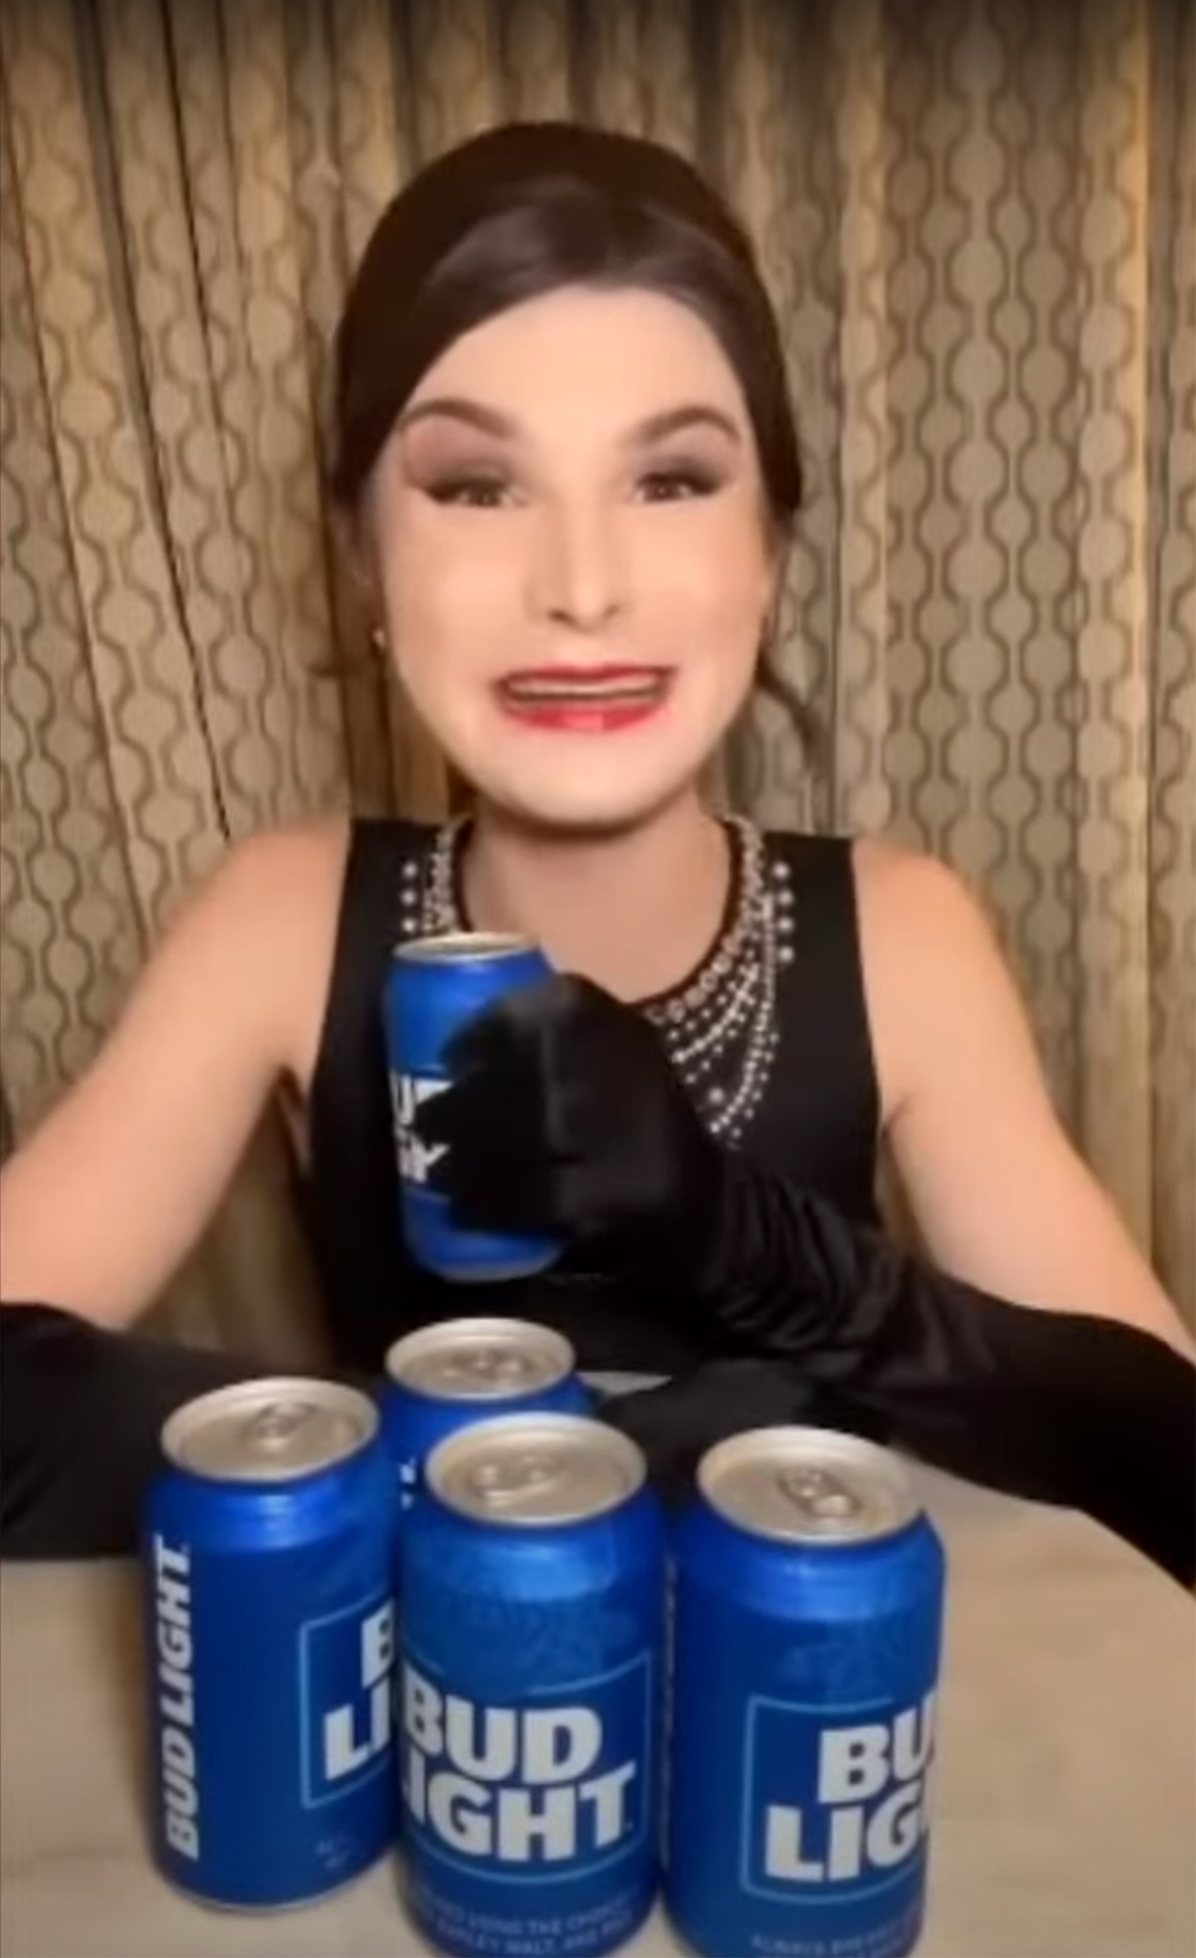 Dylan Mulvaney Takes A Stand Bud Light Under Fire For Failing To Back Her Amid Transphobic